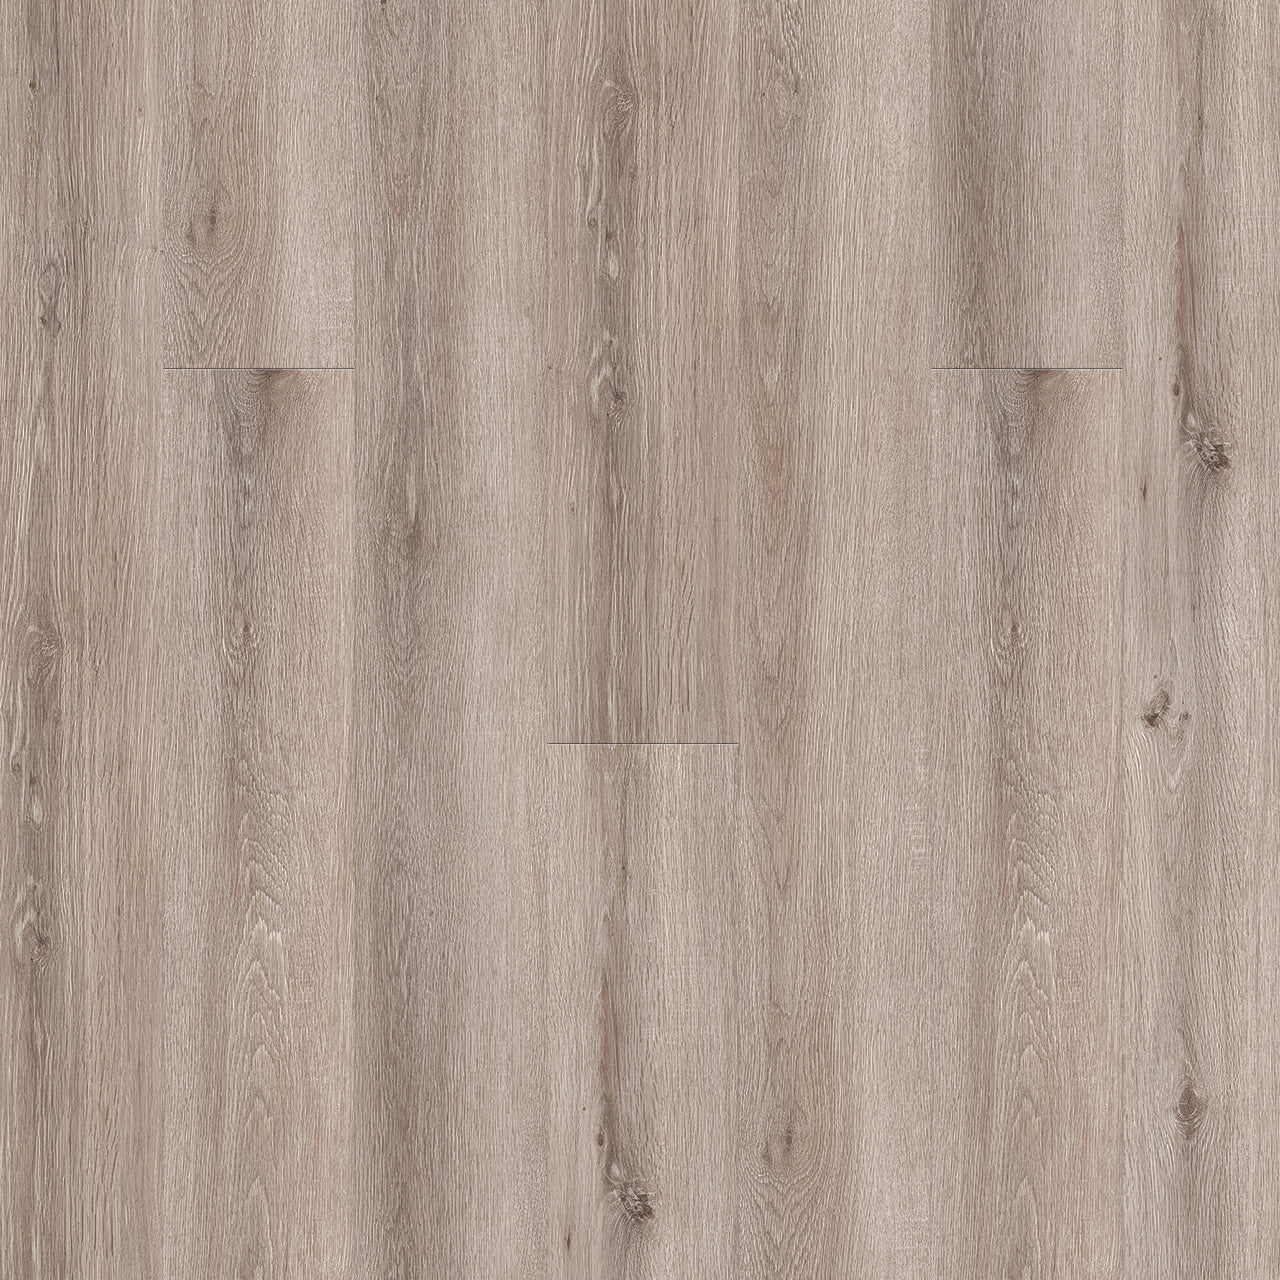 Engineered Floors - Timeless Beauty - 7 in. x 48 in. - Hargrove